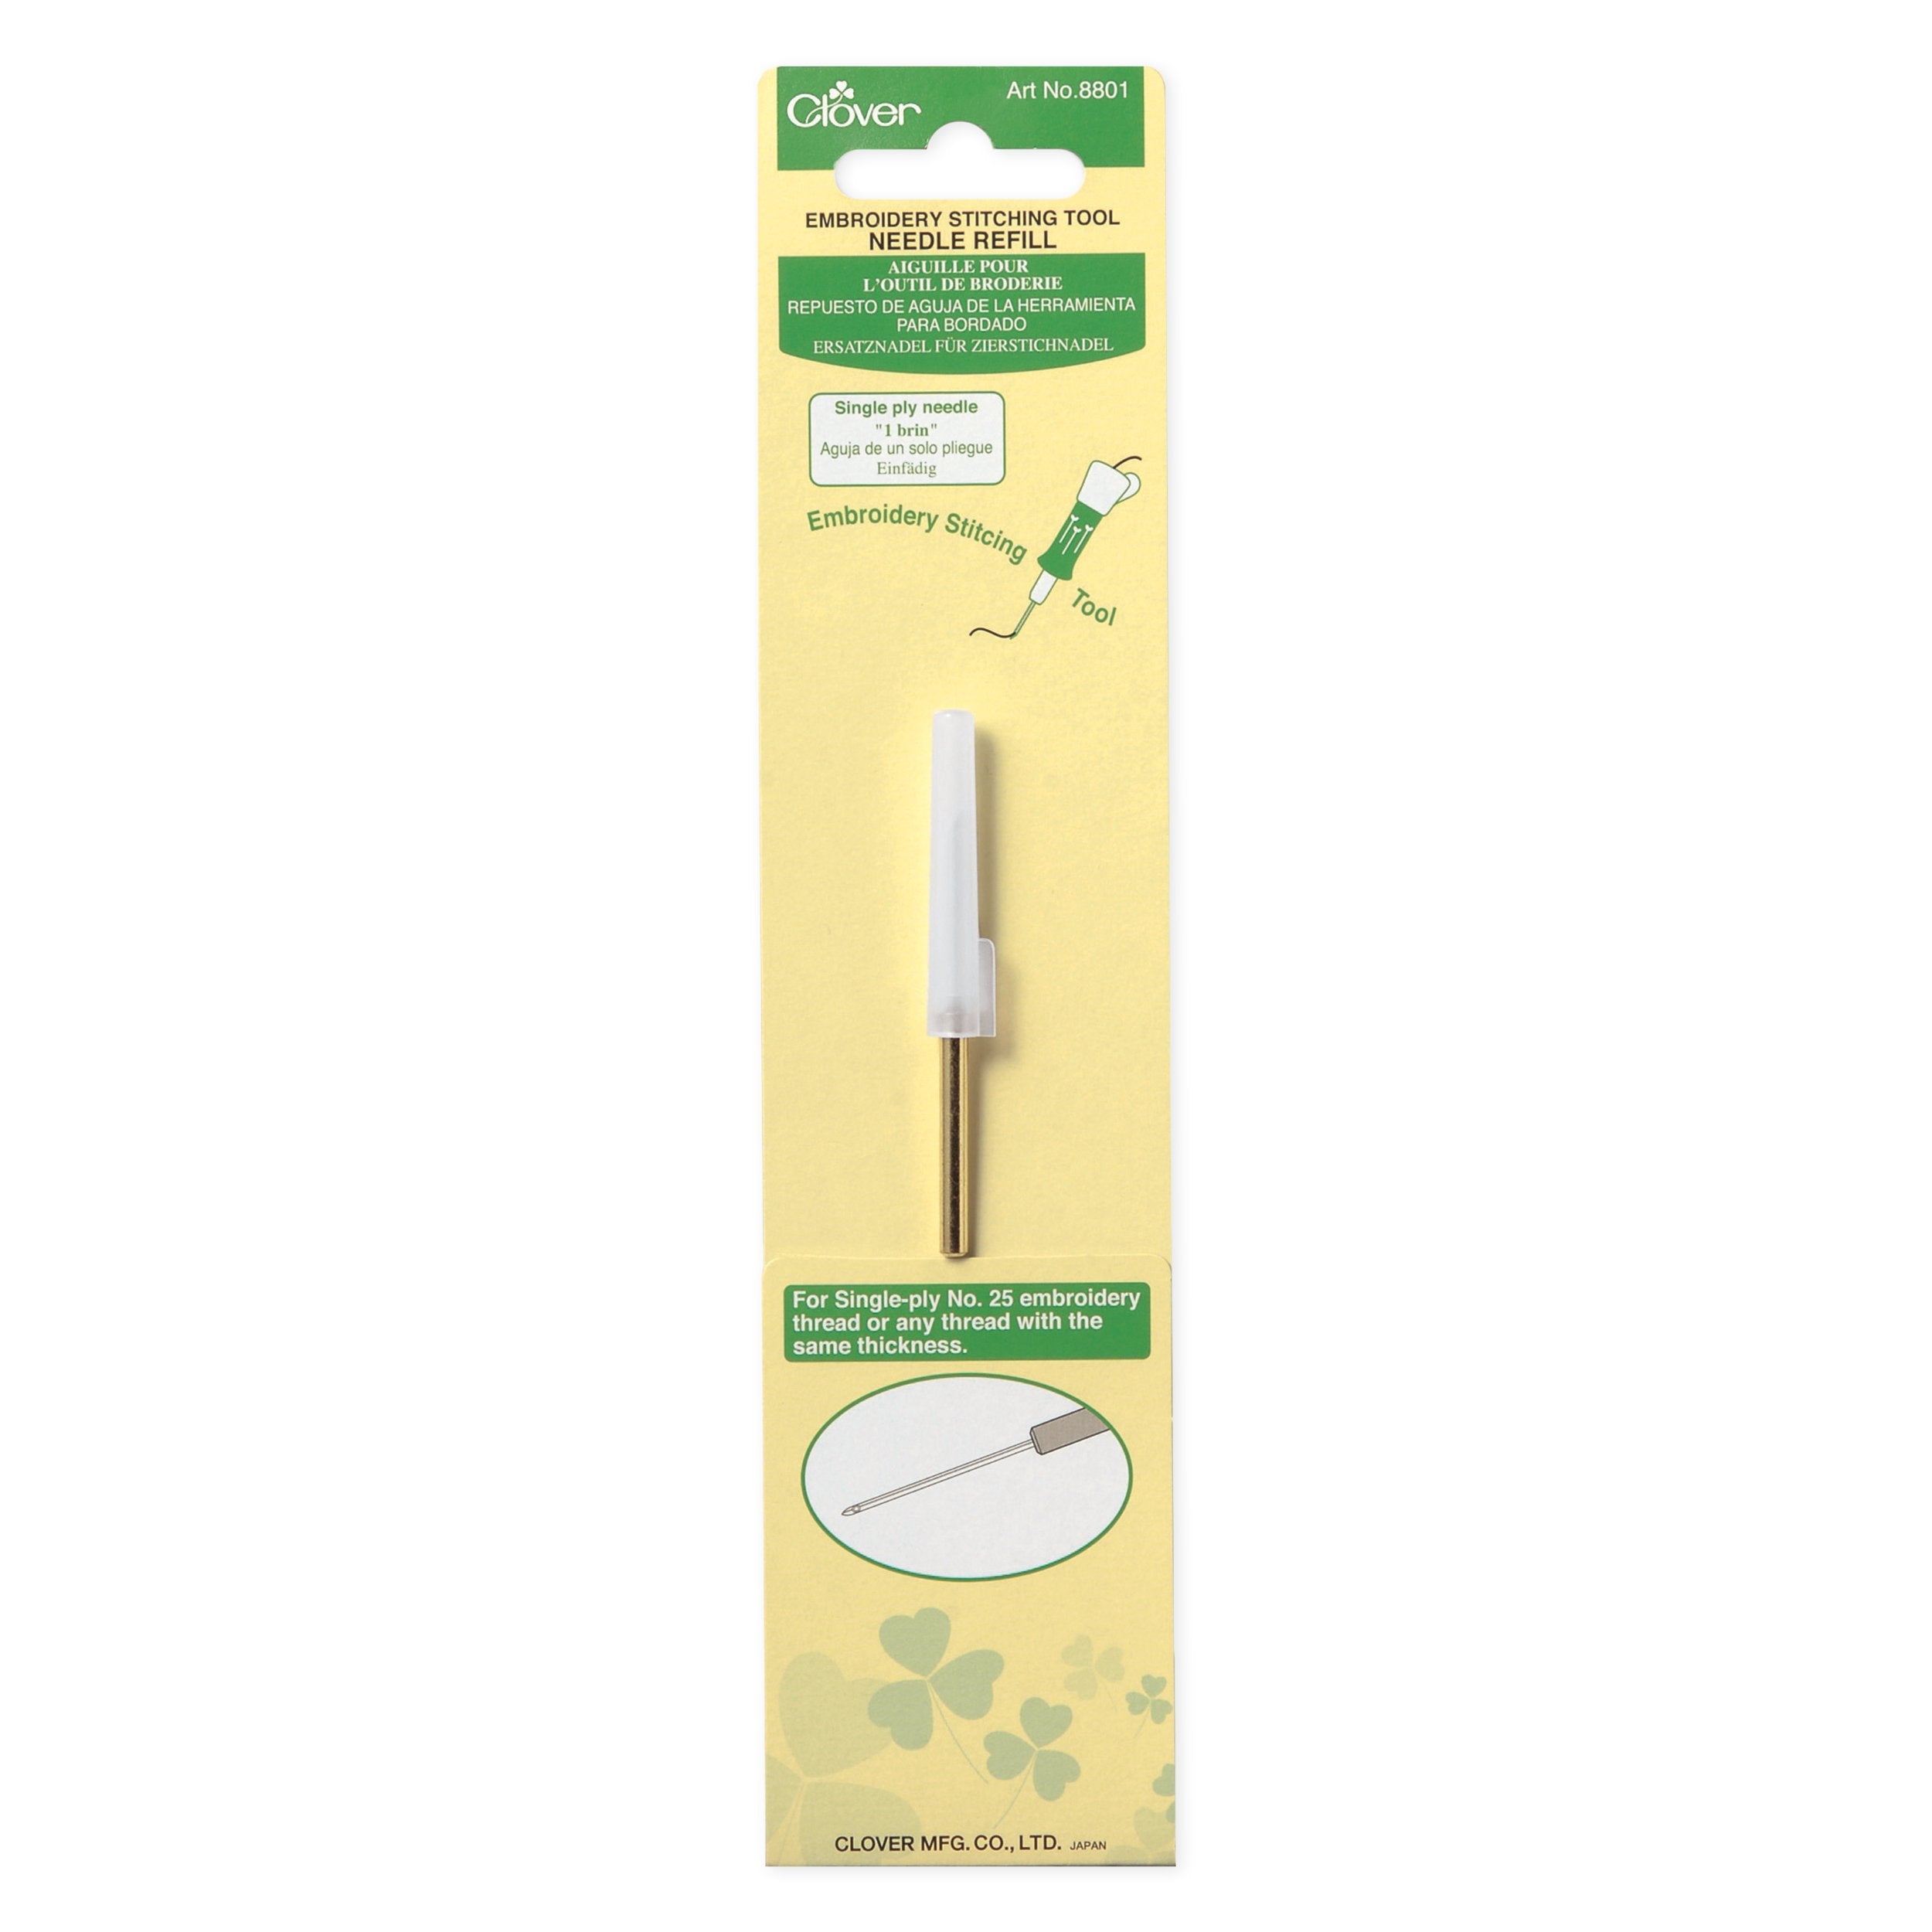 Clover Embroidery Stitching Tool Needle Threader 